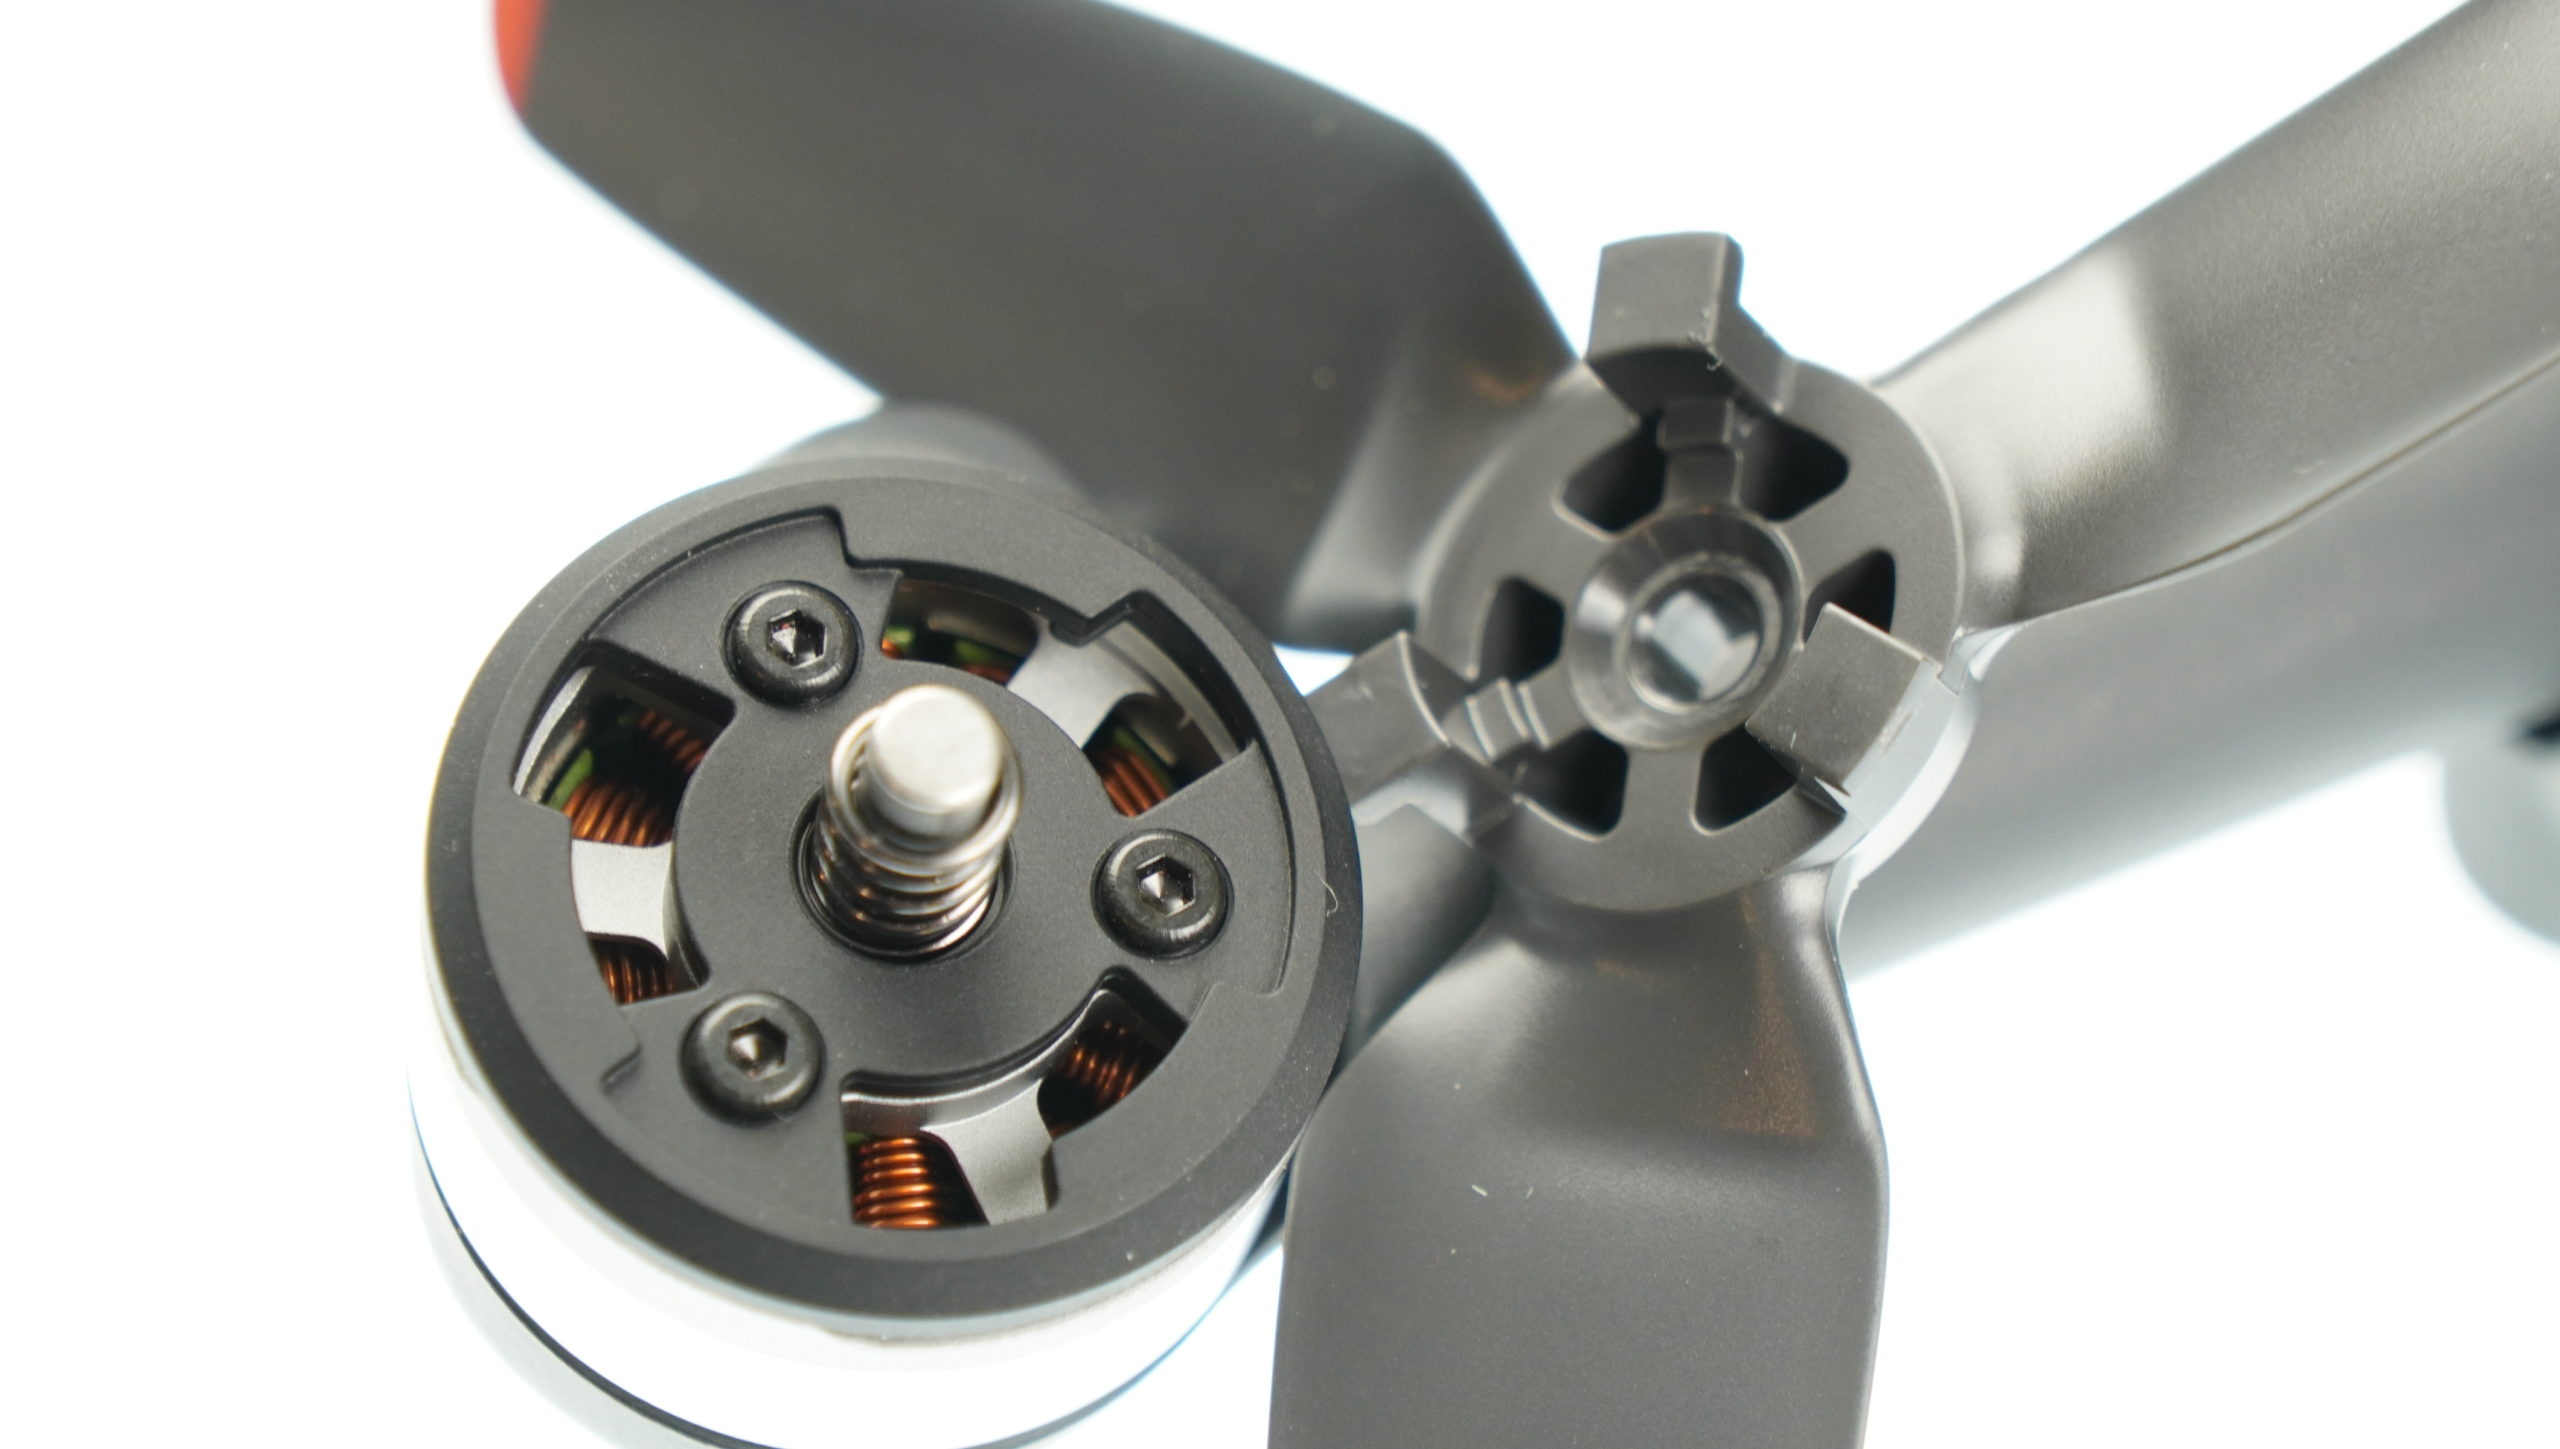 DJI FPV motor and quick release propeller